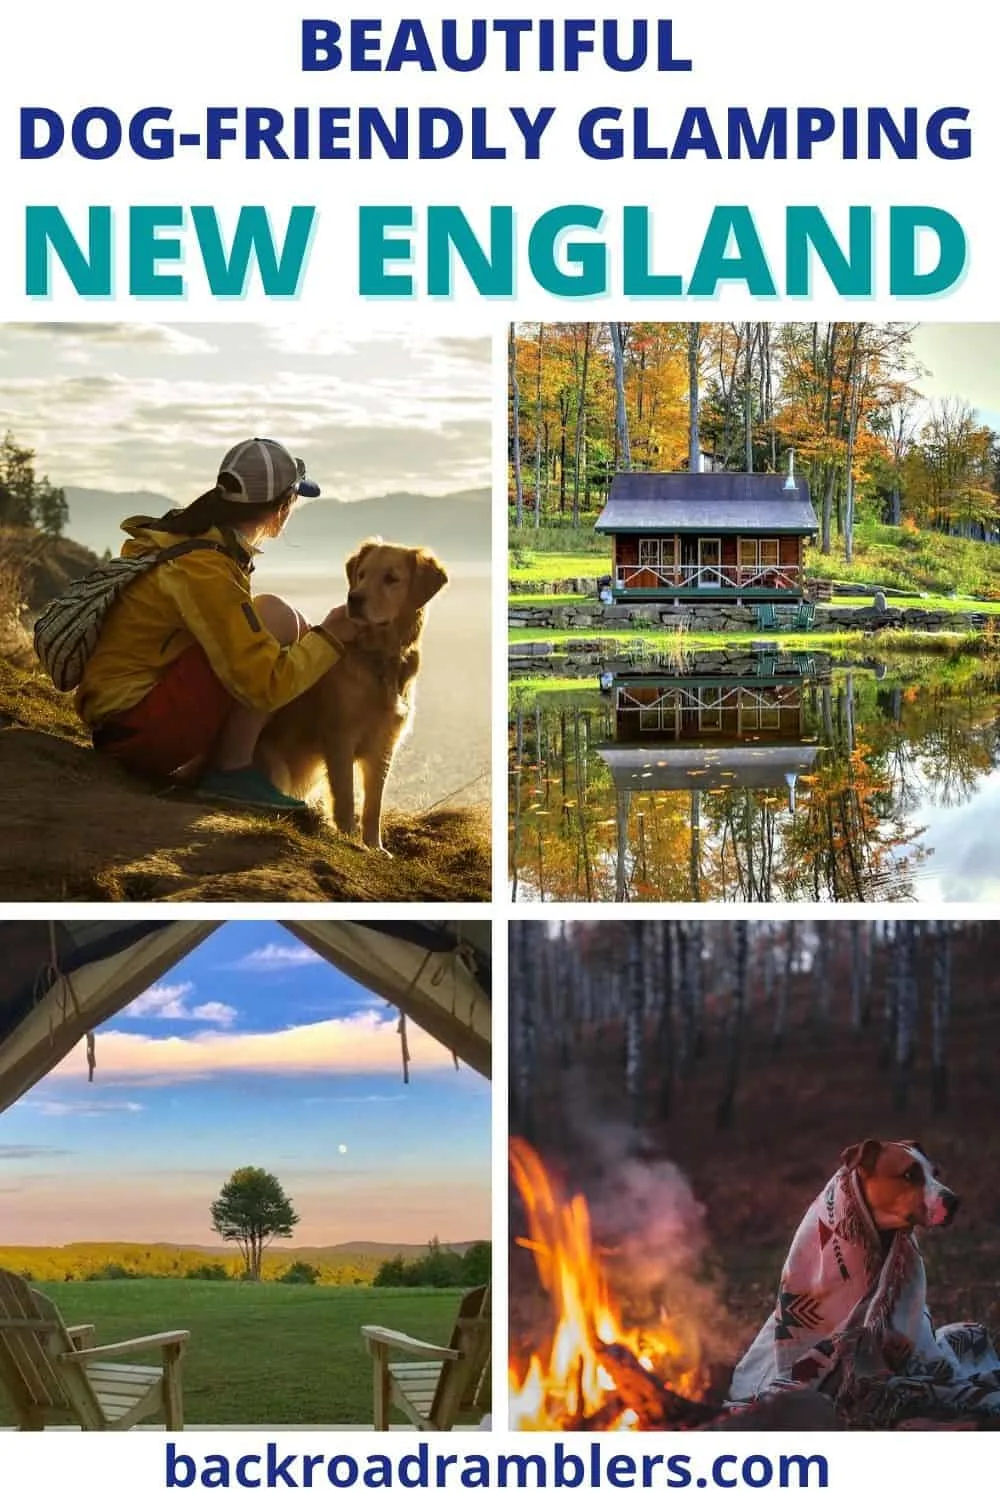 A collage of photos featuring glamping spots in New England that allow dogs. Photo credit to VRBO and Tentrr.